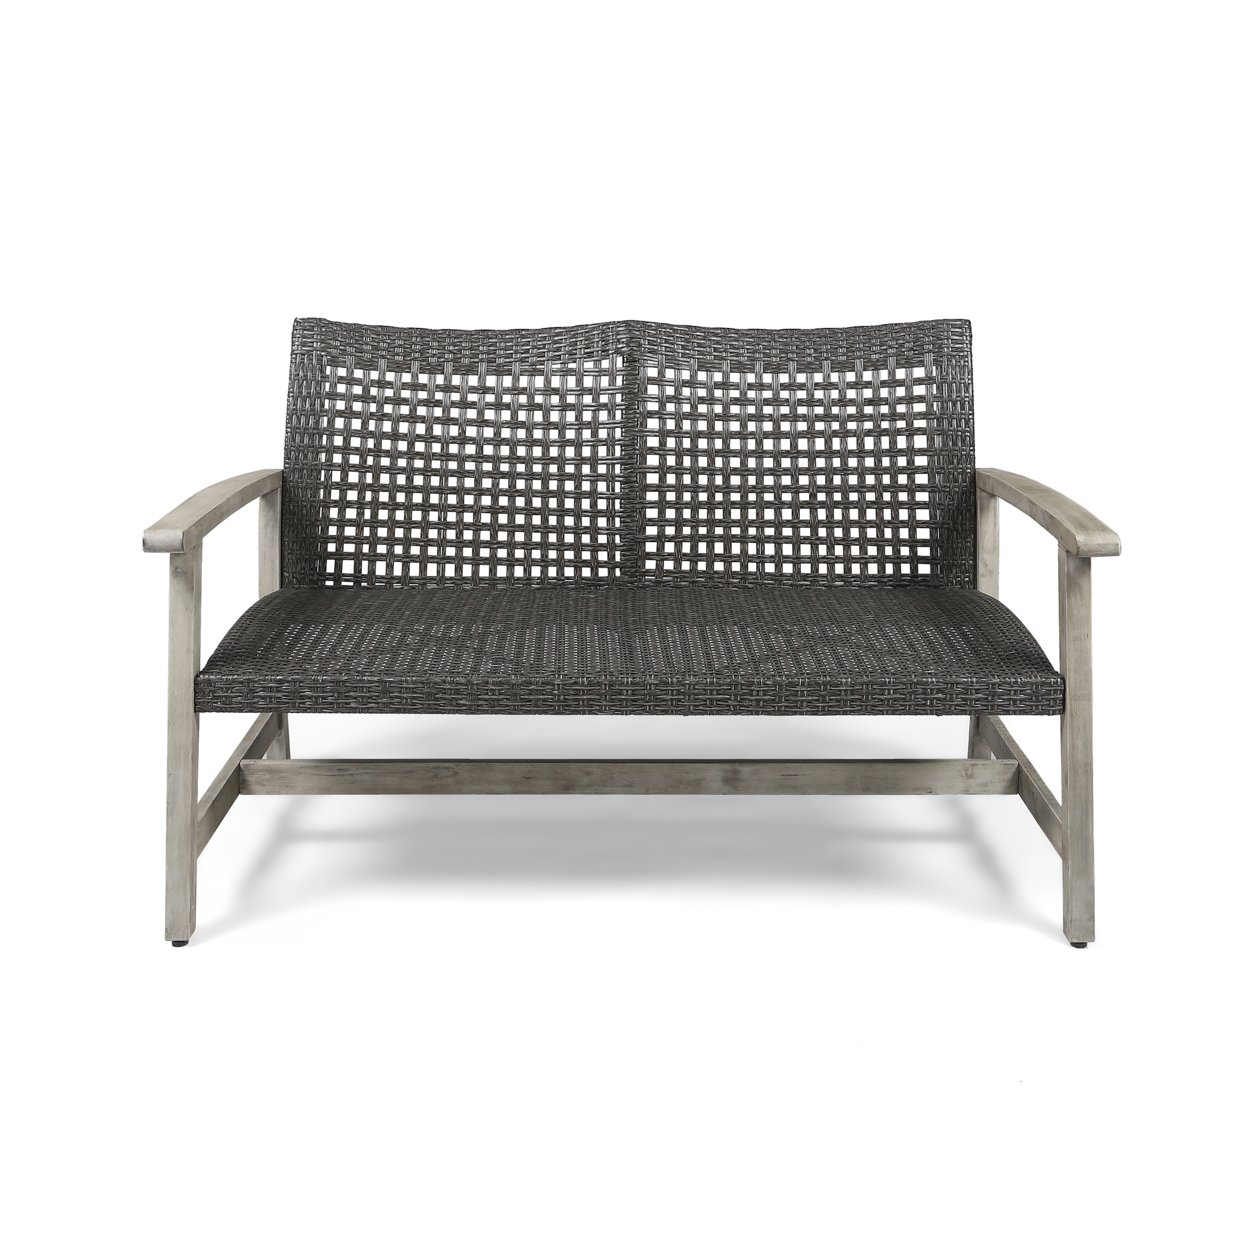 Marcia Outdoor Wood And Wicker Loveseat - Mocha / Natural